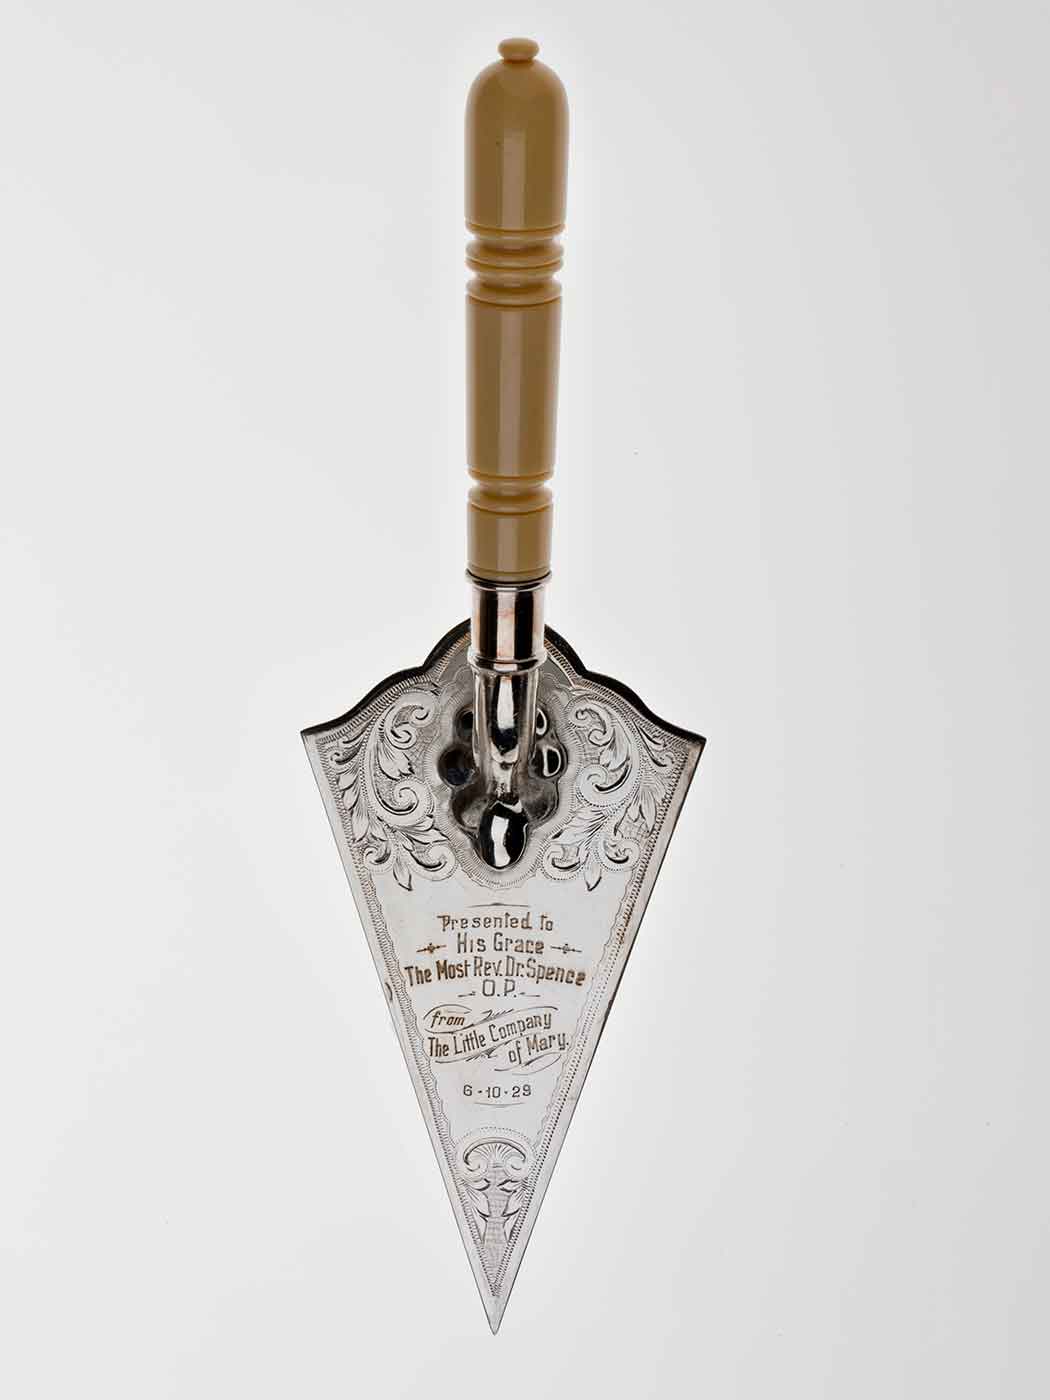 Silver ceremonial trowel with engraved text and ornate borders. - click to view larger image